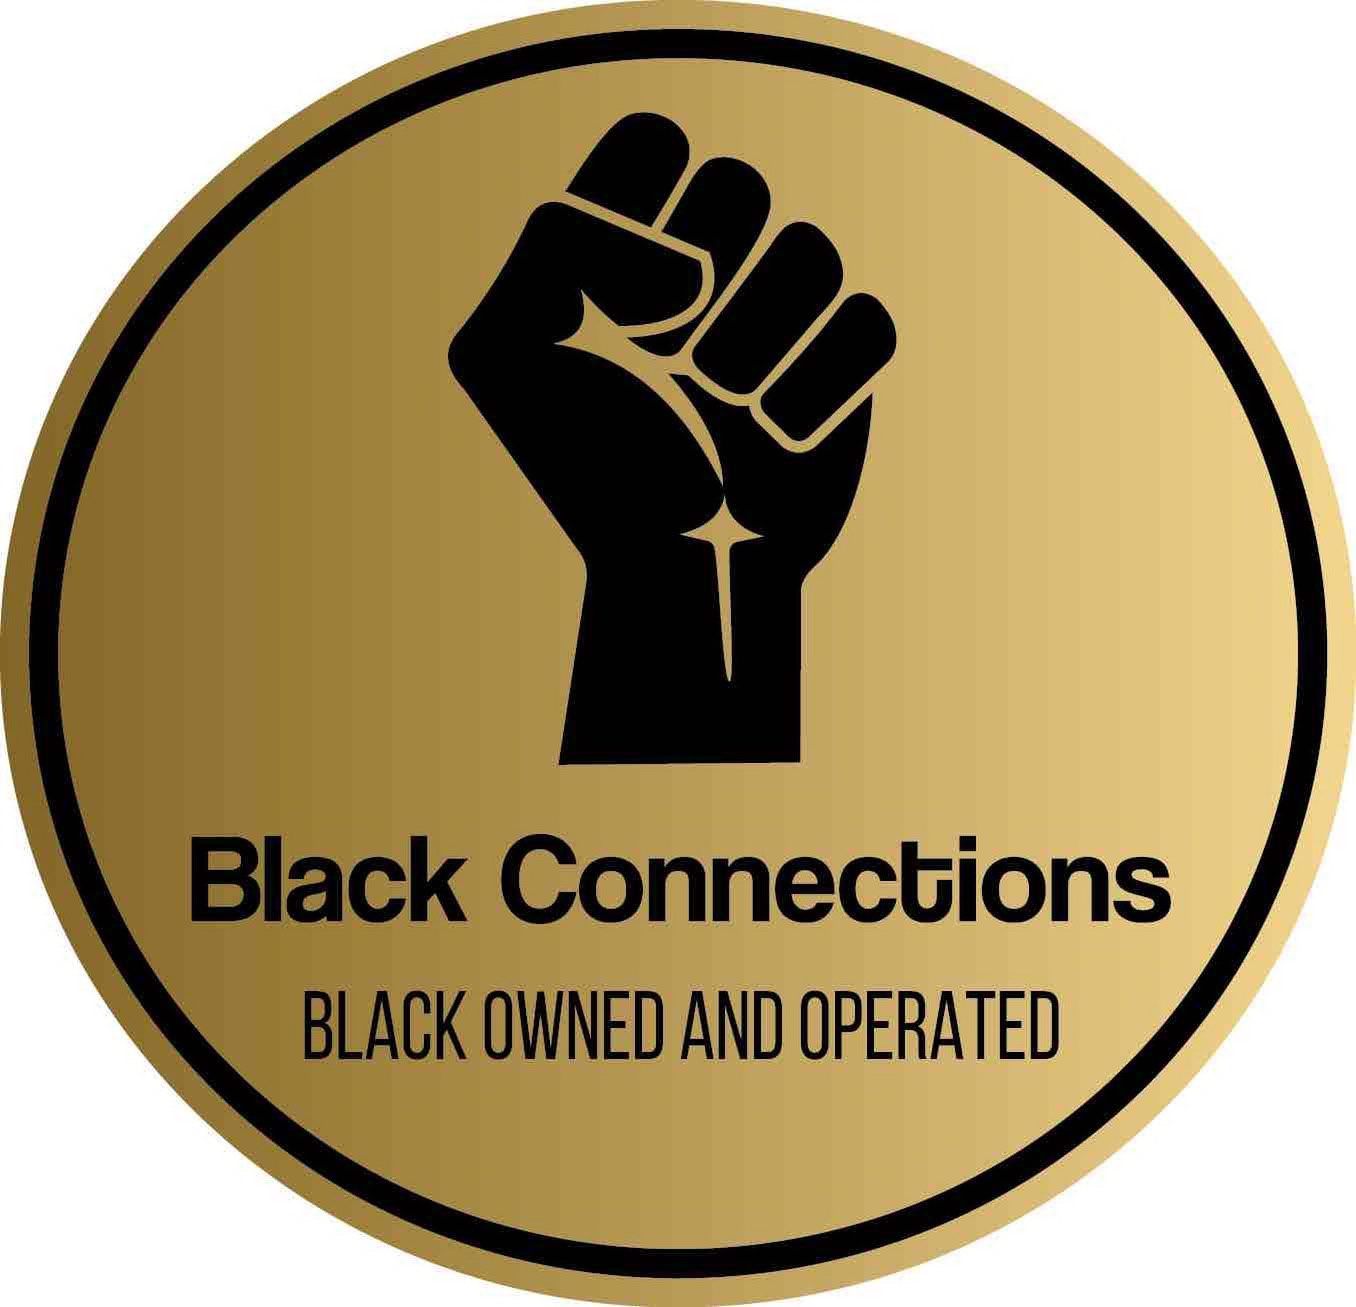  BLACK CONNECTIONS, BLACK OWNED AND OPERATED,